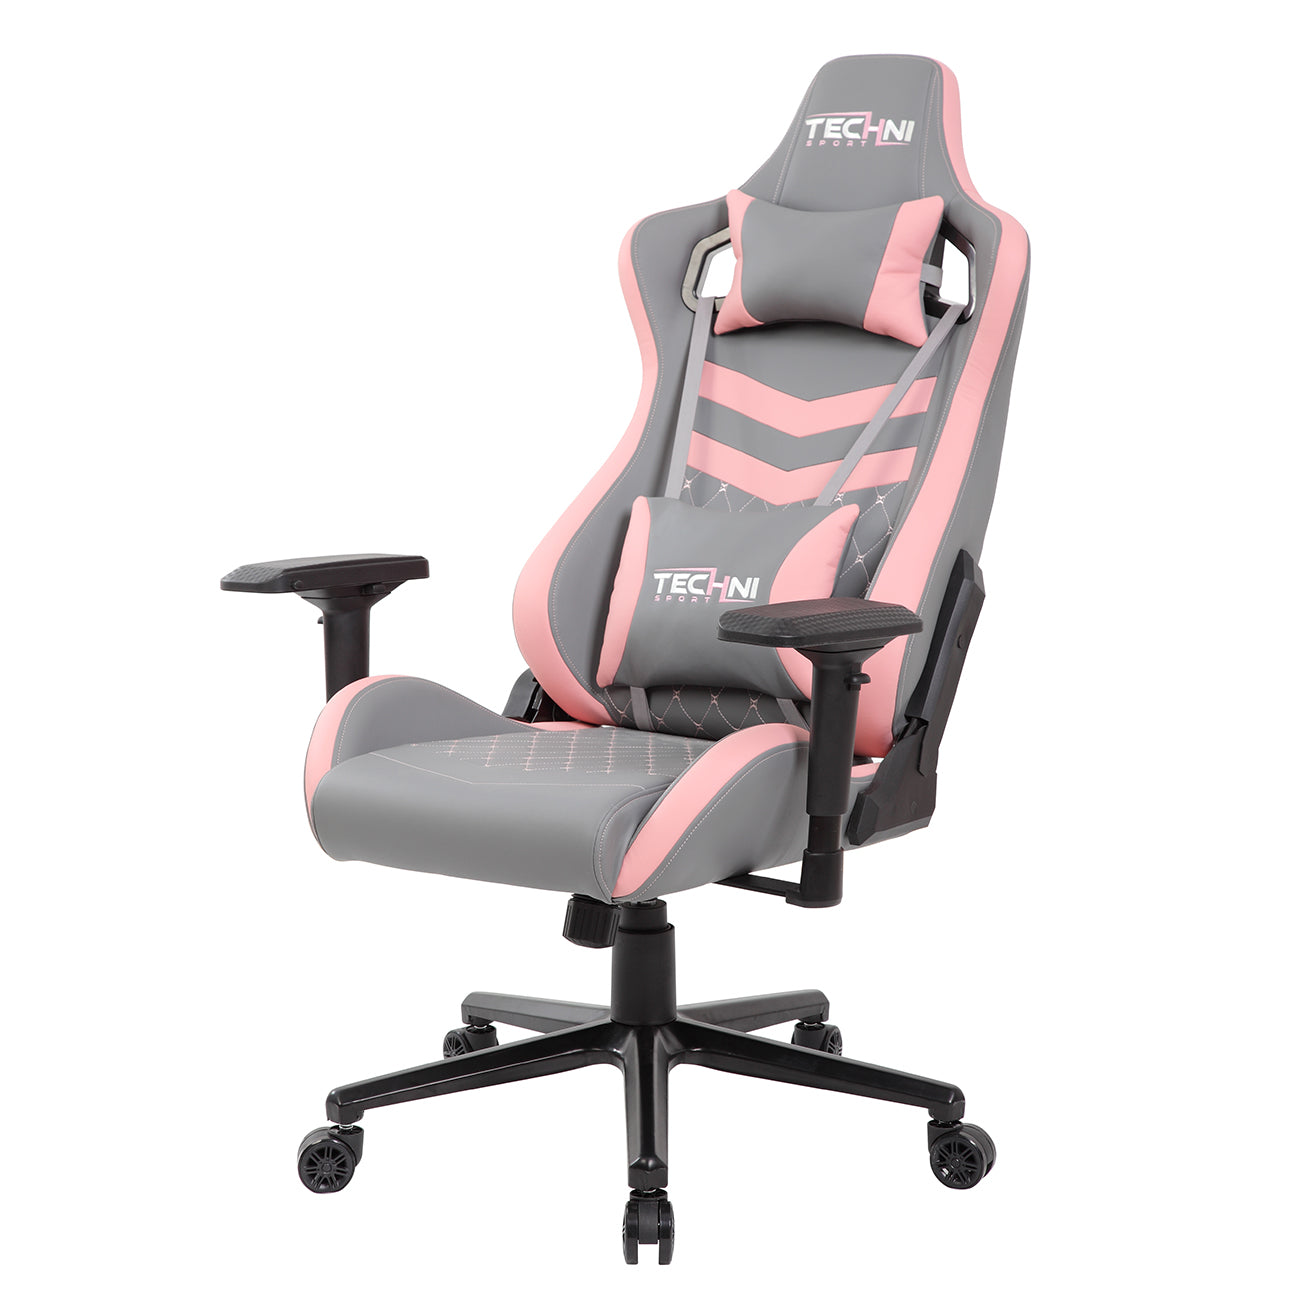 Techni Sport TS-83 Ergonomic High Back Racer Style PC Gaming Chair, Grey/Pink